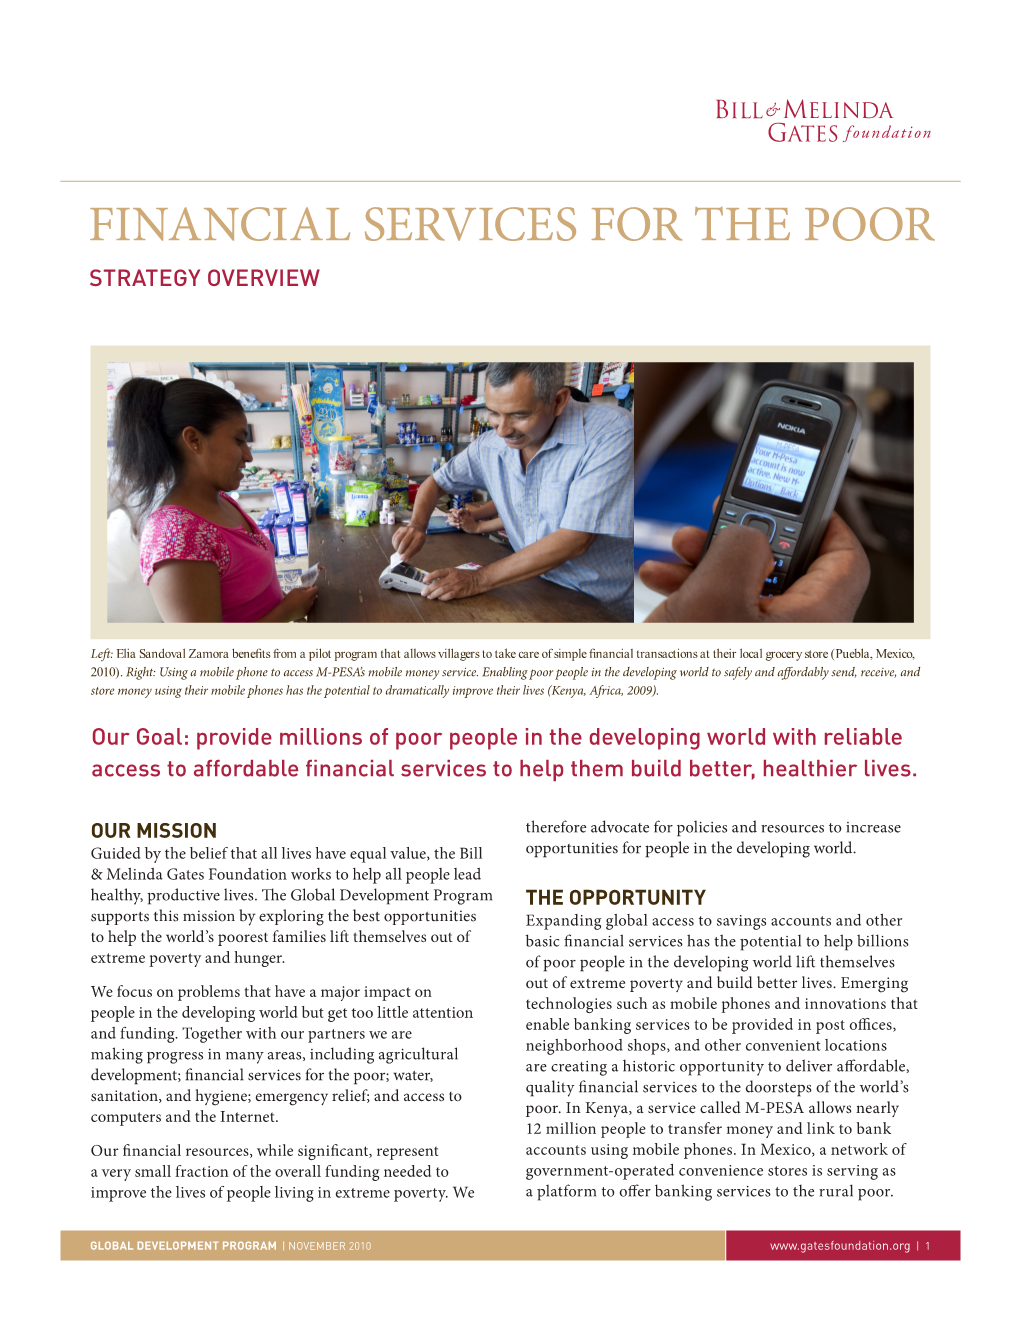 Financial Services for the Poor Strategy Overview